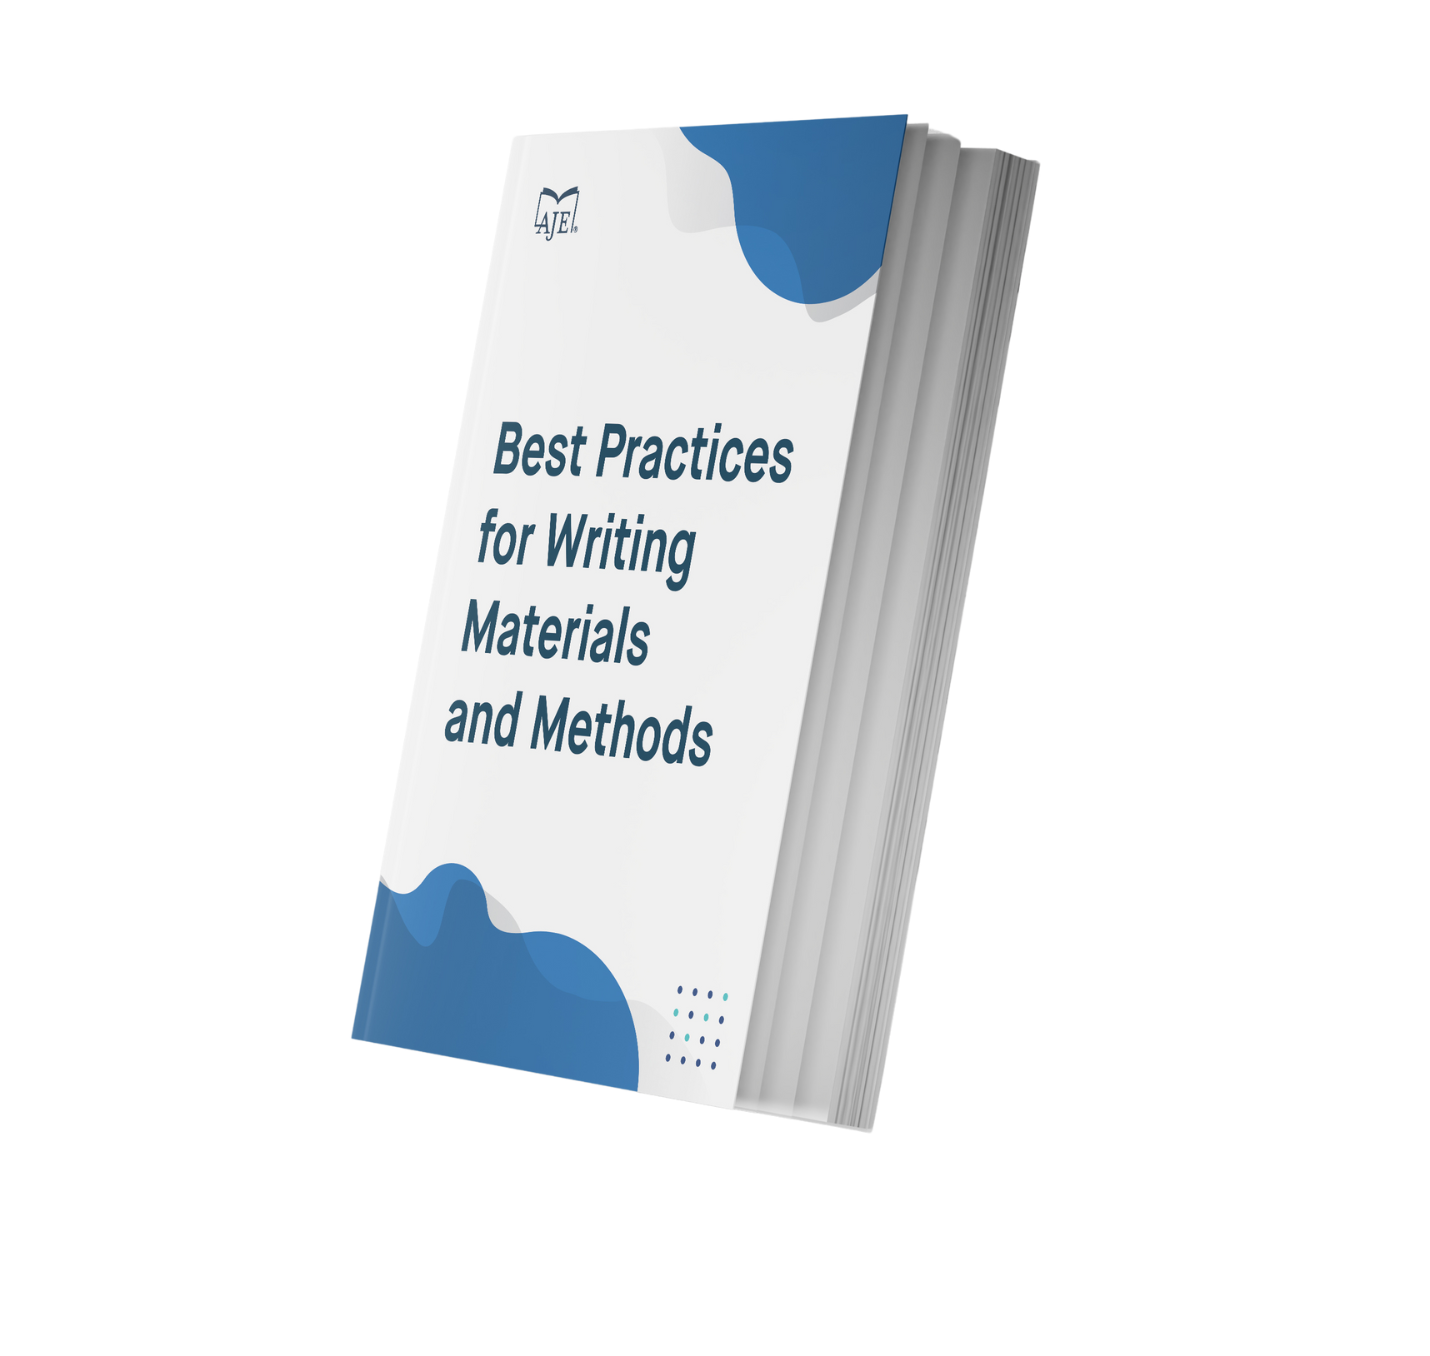 Best Practices for Writing Materials and Methods e-book